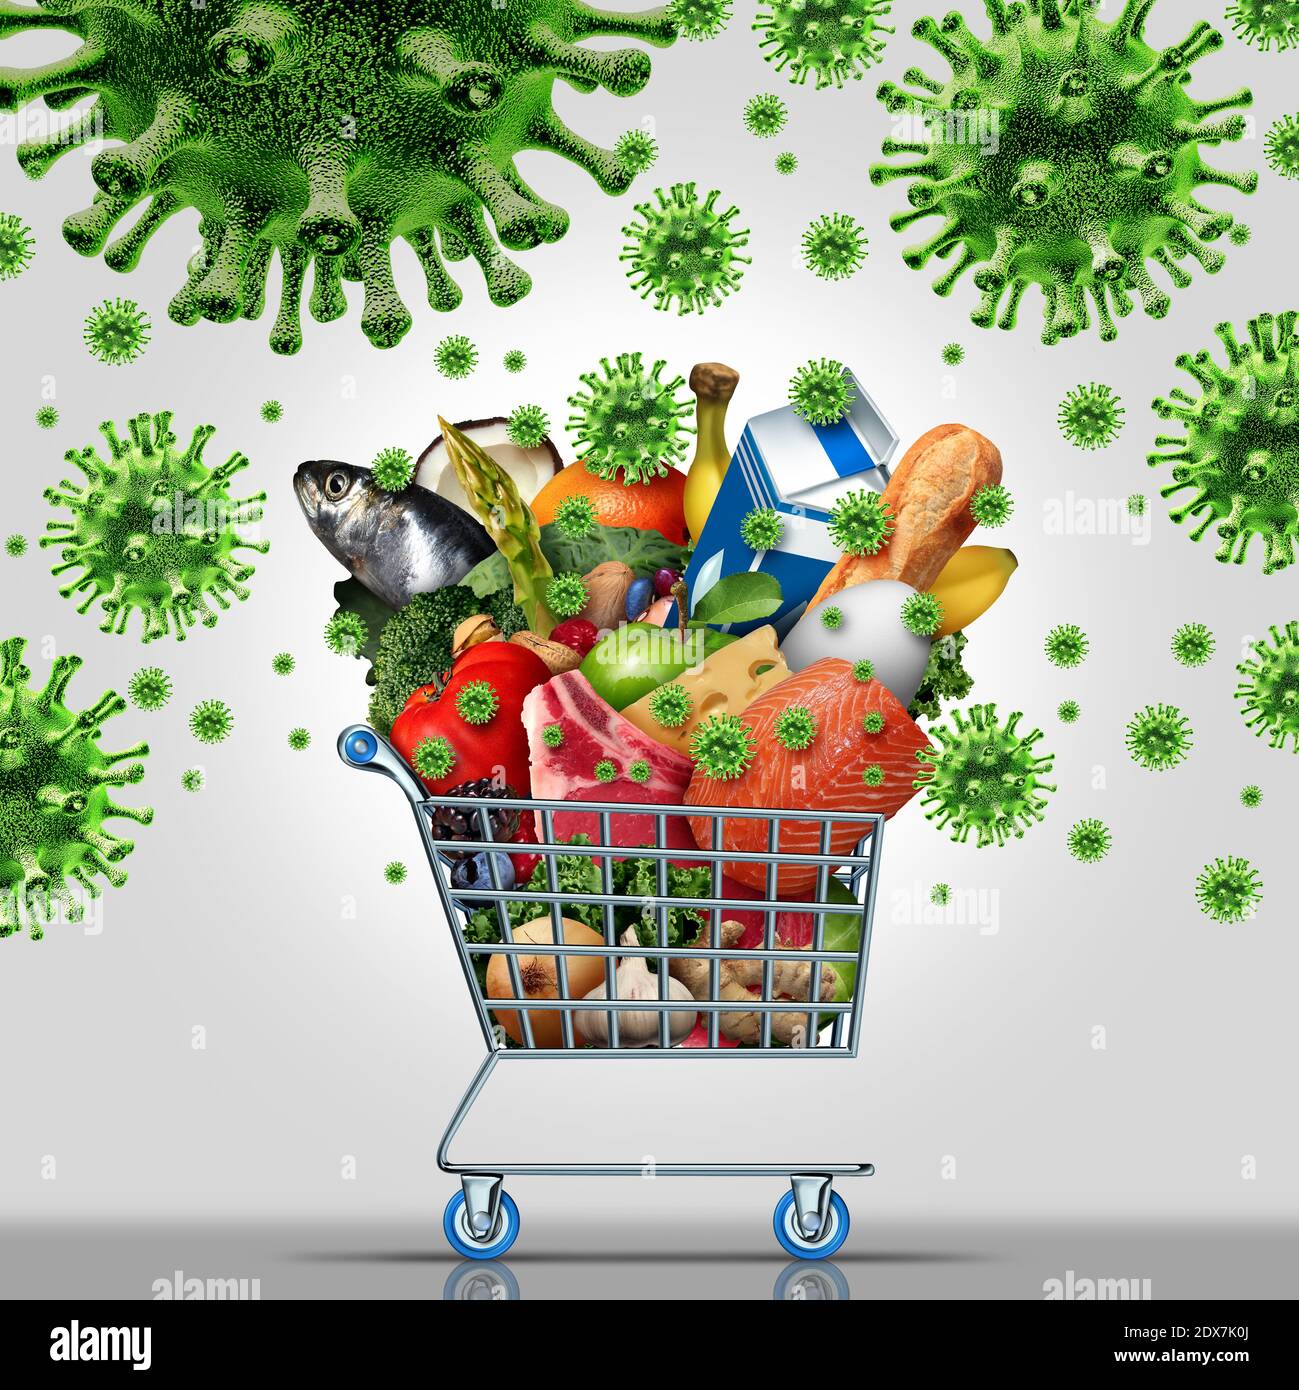 Virus contaminated food and grocery or coronavirus groceries health safety as a supermarket shopping cart with milk eggs cheese meat bread. Stock Photo